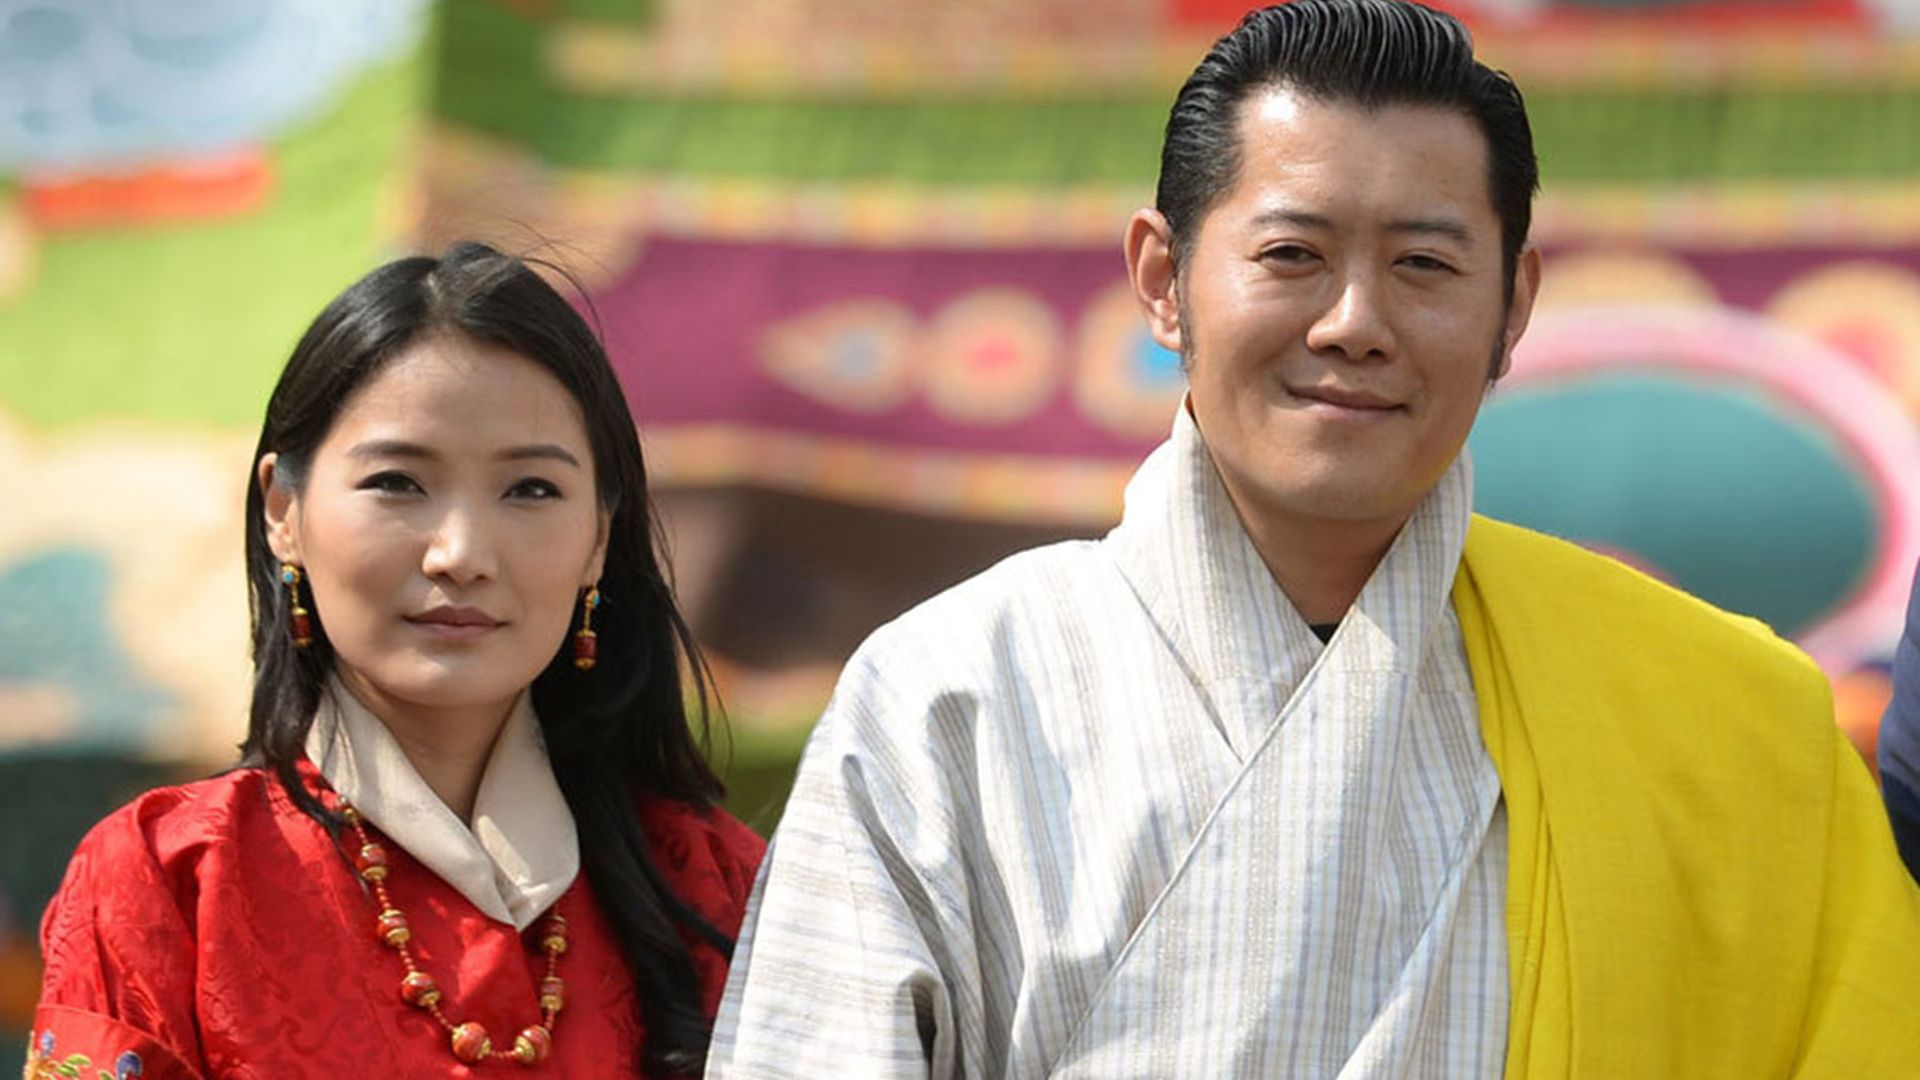 King Jigme Khesar and Queen Jetsun Pema of Bhutan welcome second baby - find out the gender